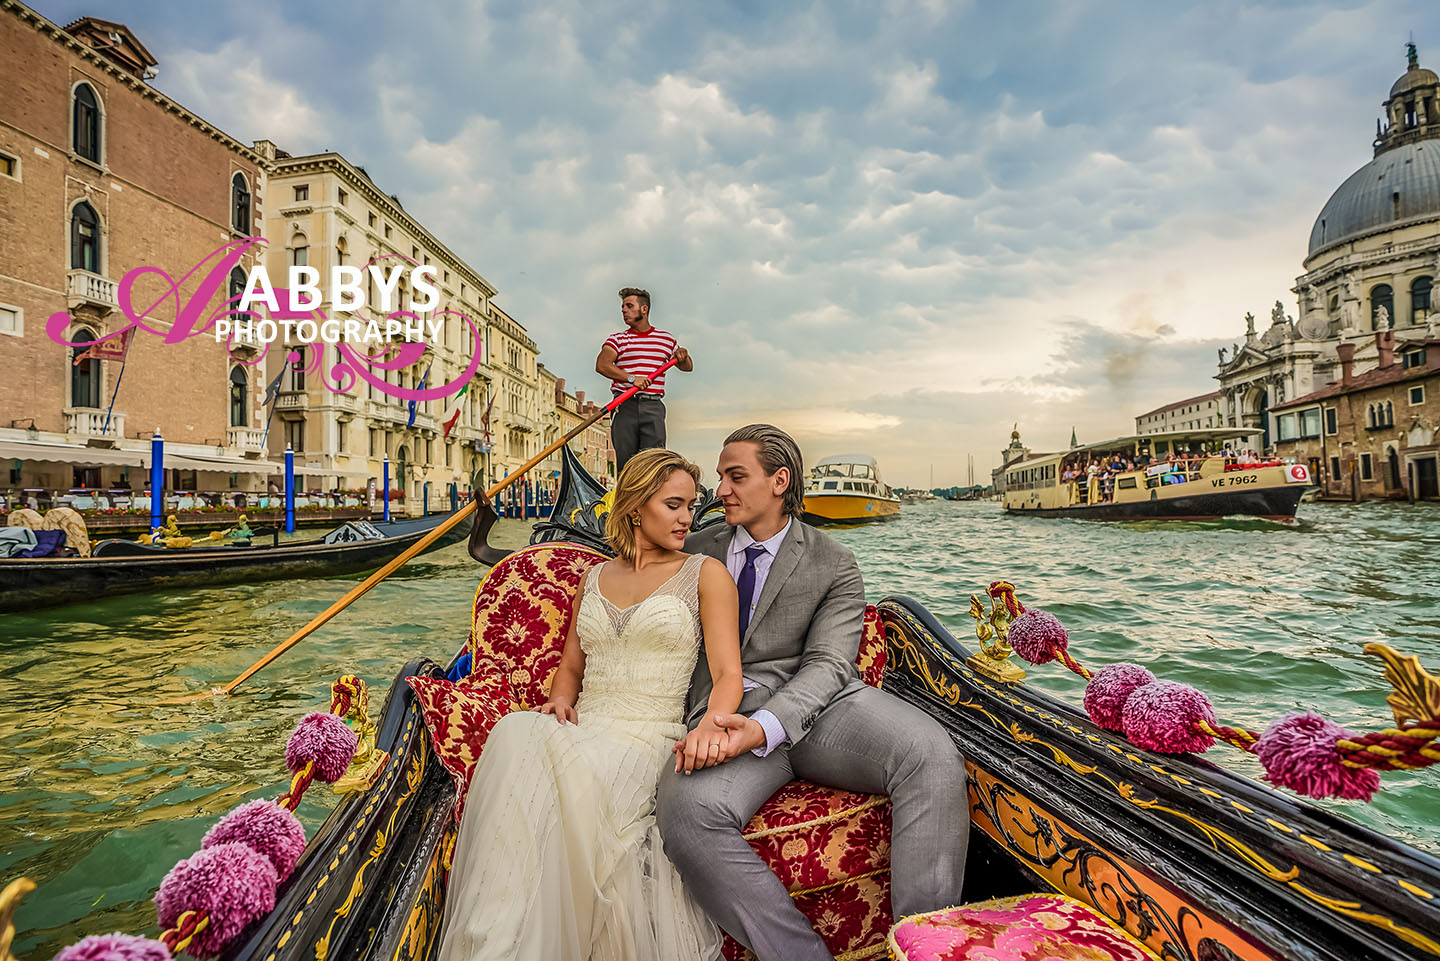 Abbys Photography can make you feel like your wedding or engagement is in Venice instead of Ventura County. Call 661-342-4945  